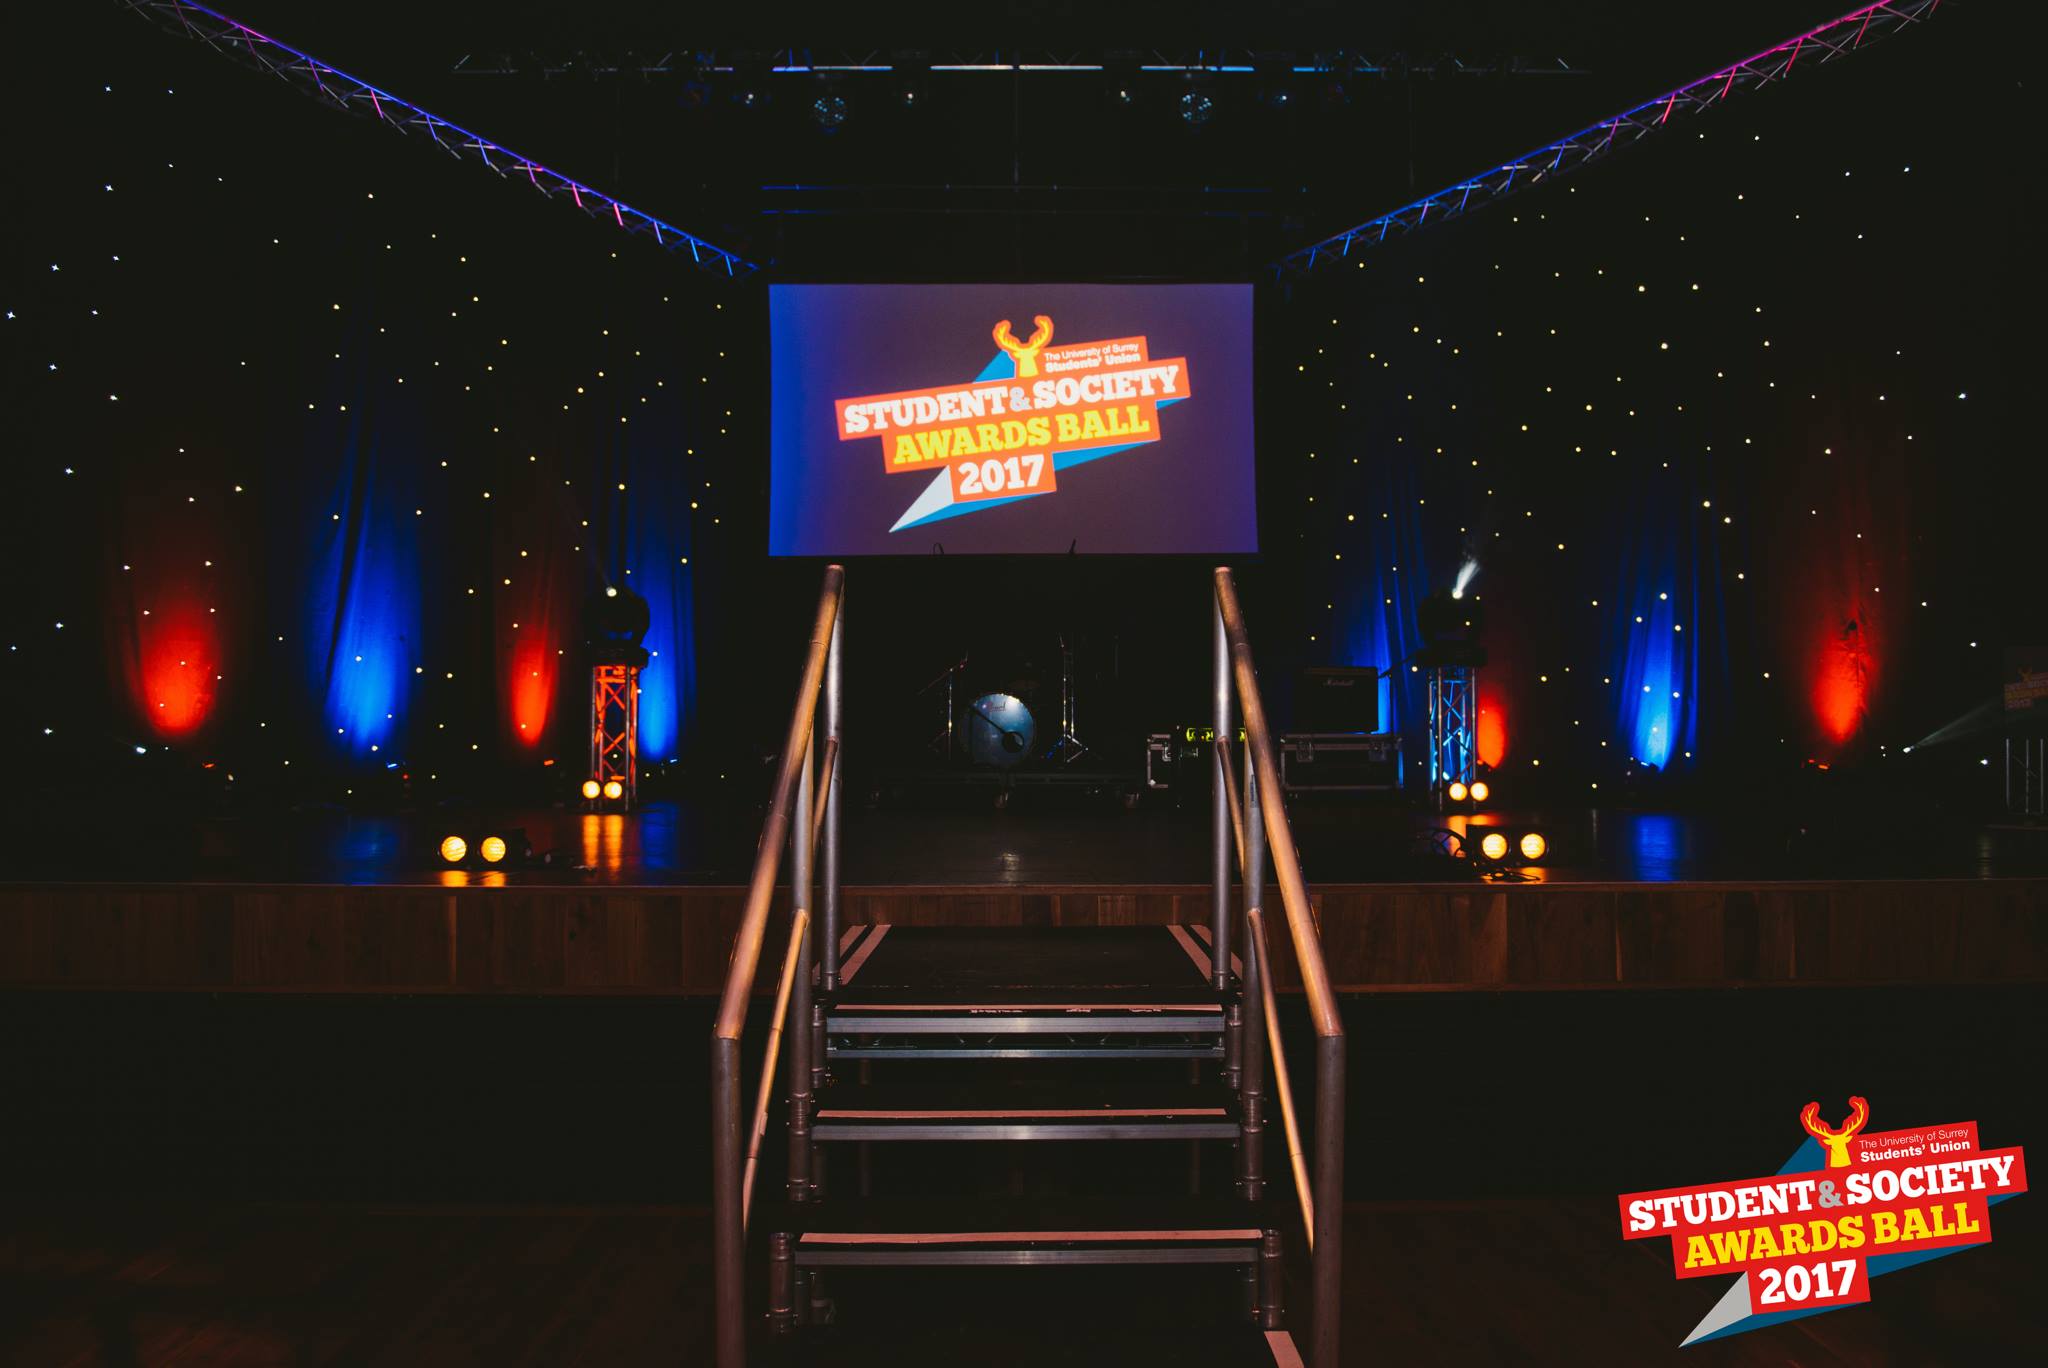 student and societies awards logo stage.jpg